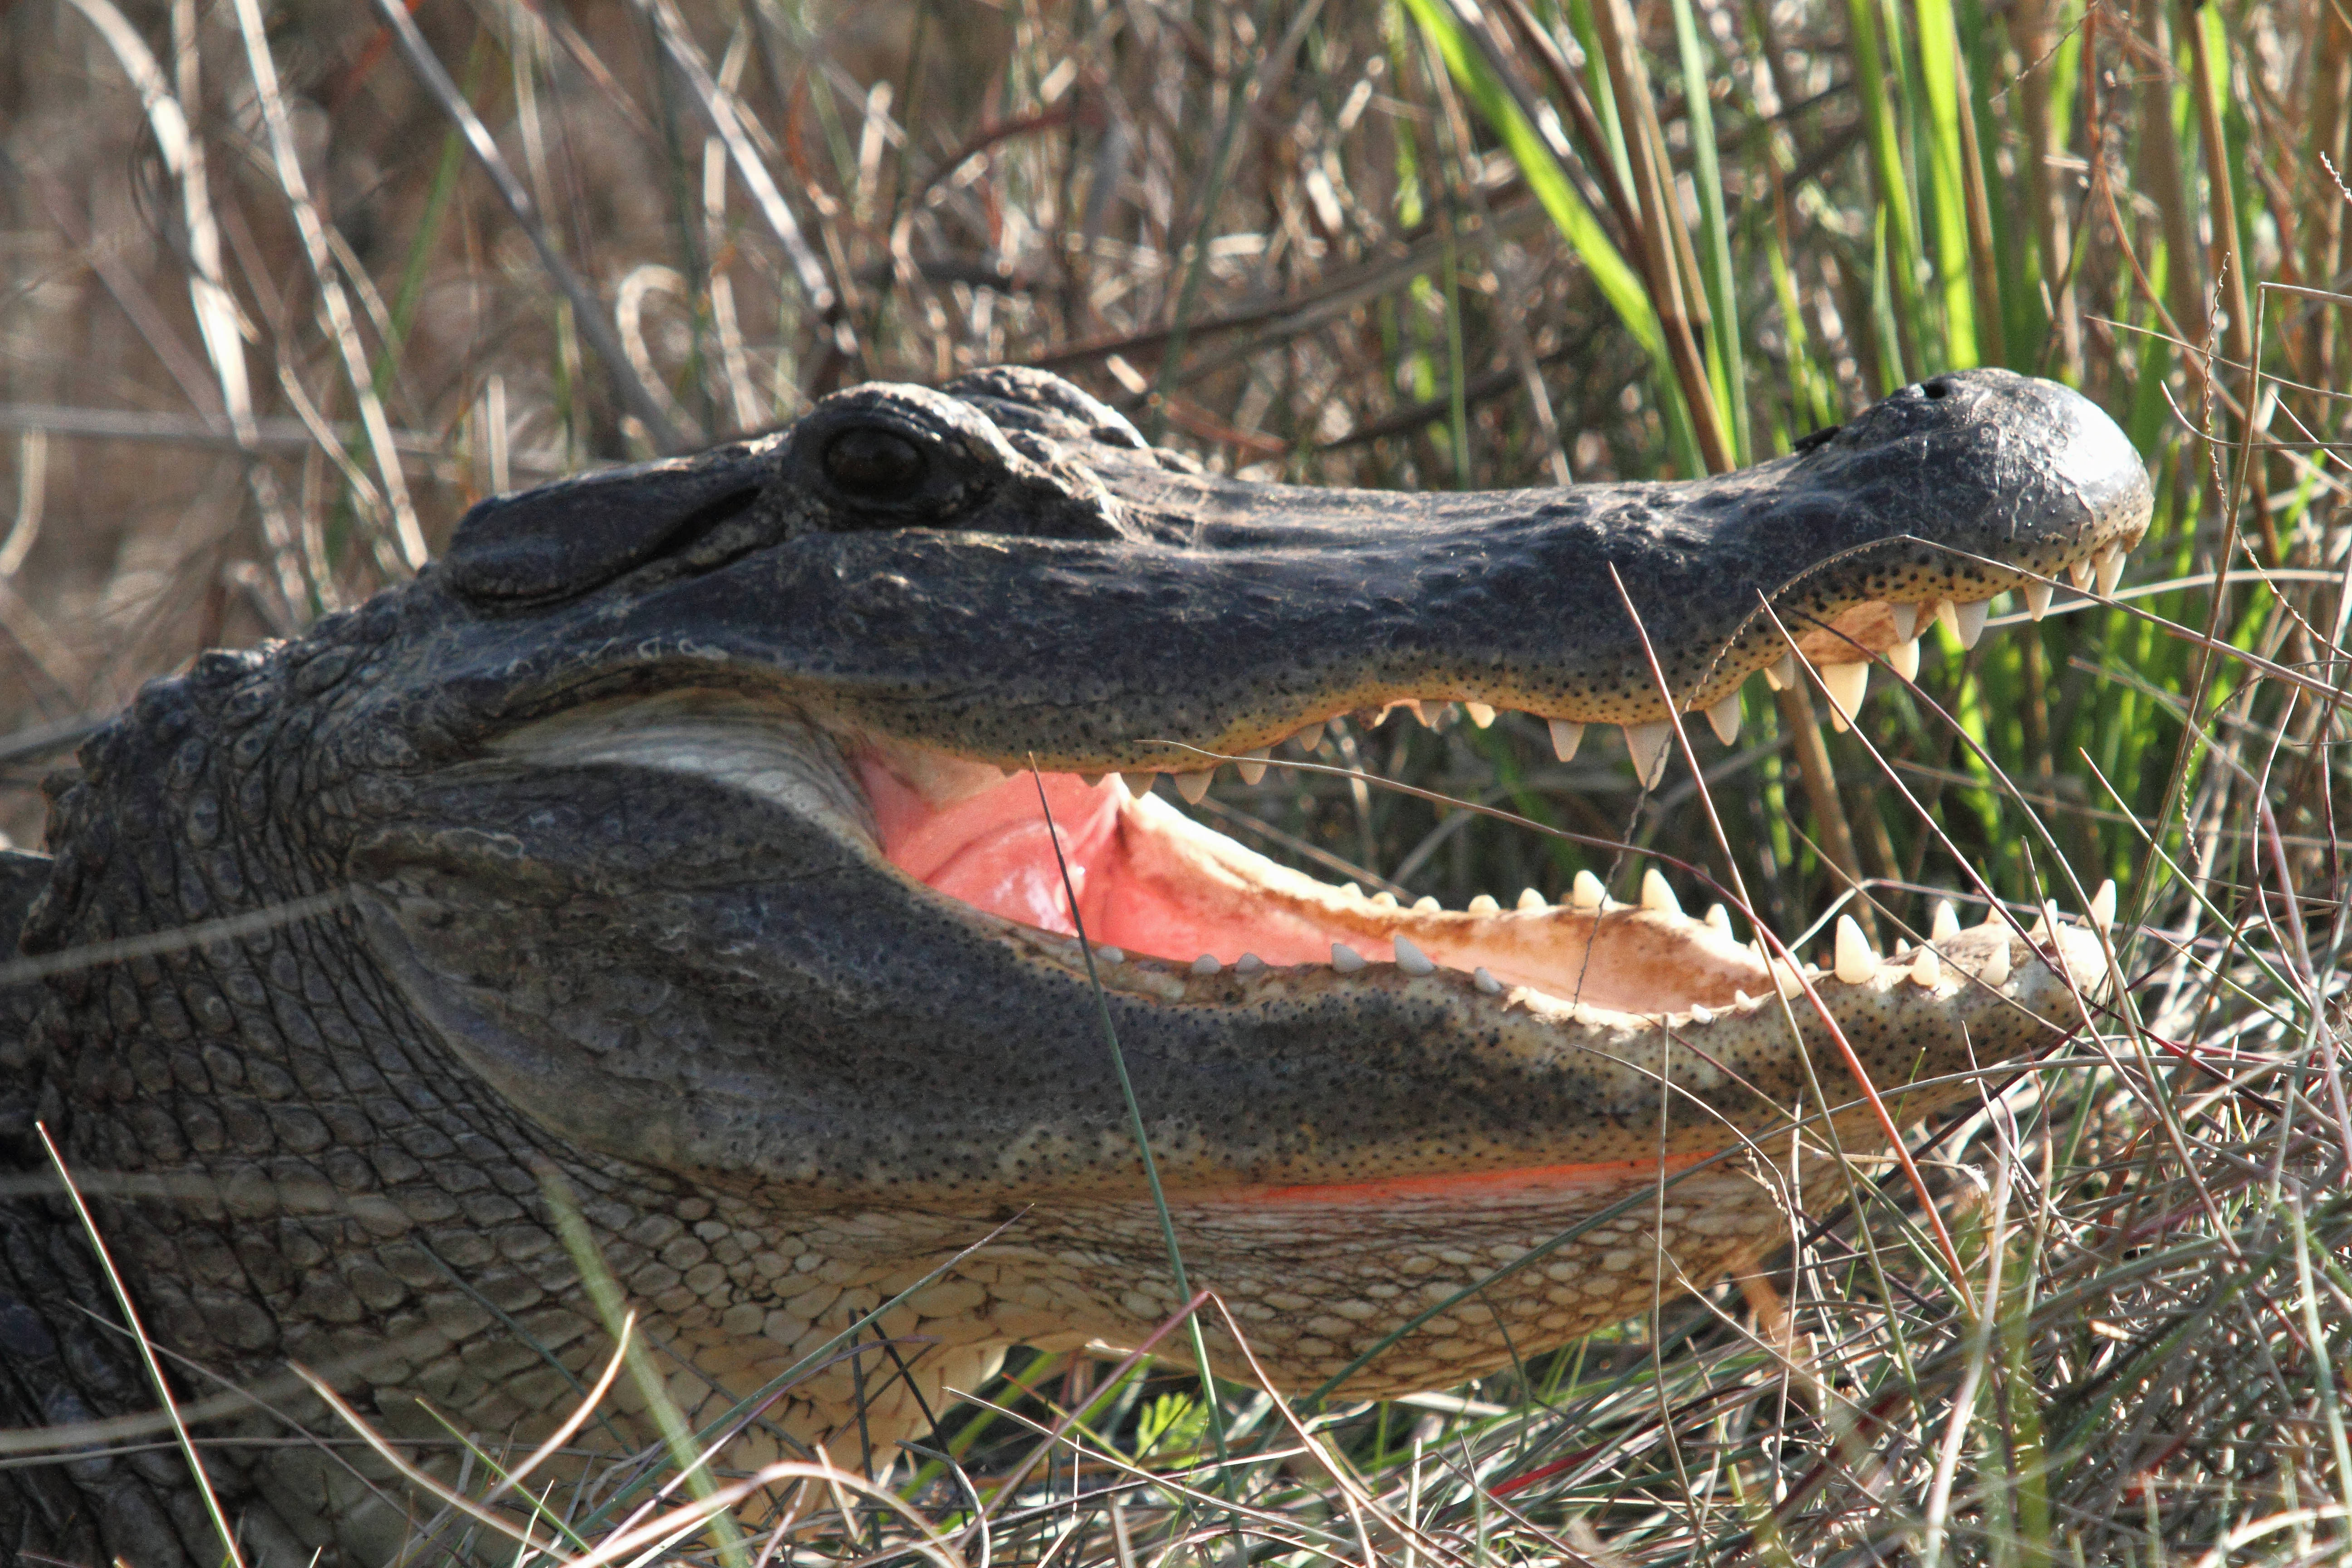 Head of an alligator in the brush, mouth slightly open